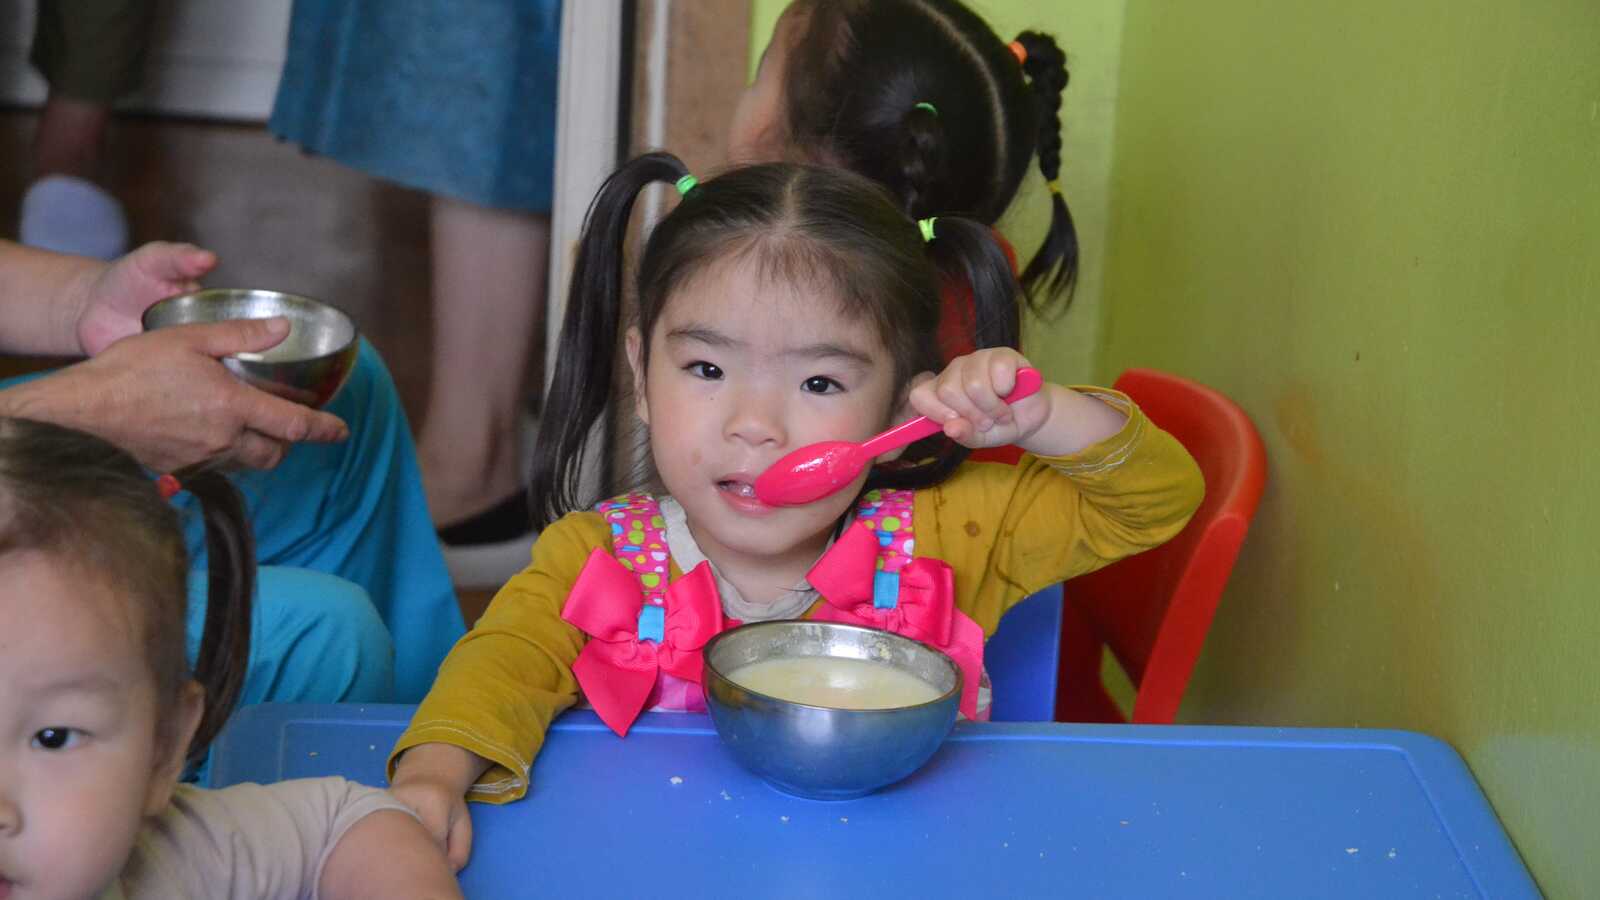 Little girl in Mongolia eating from a bowl with pink spoon